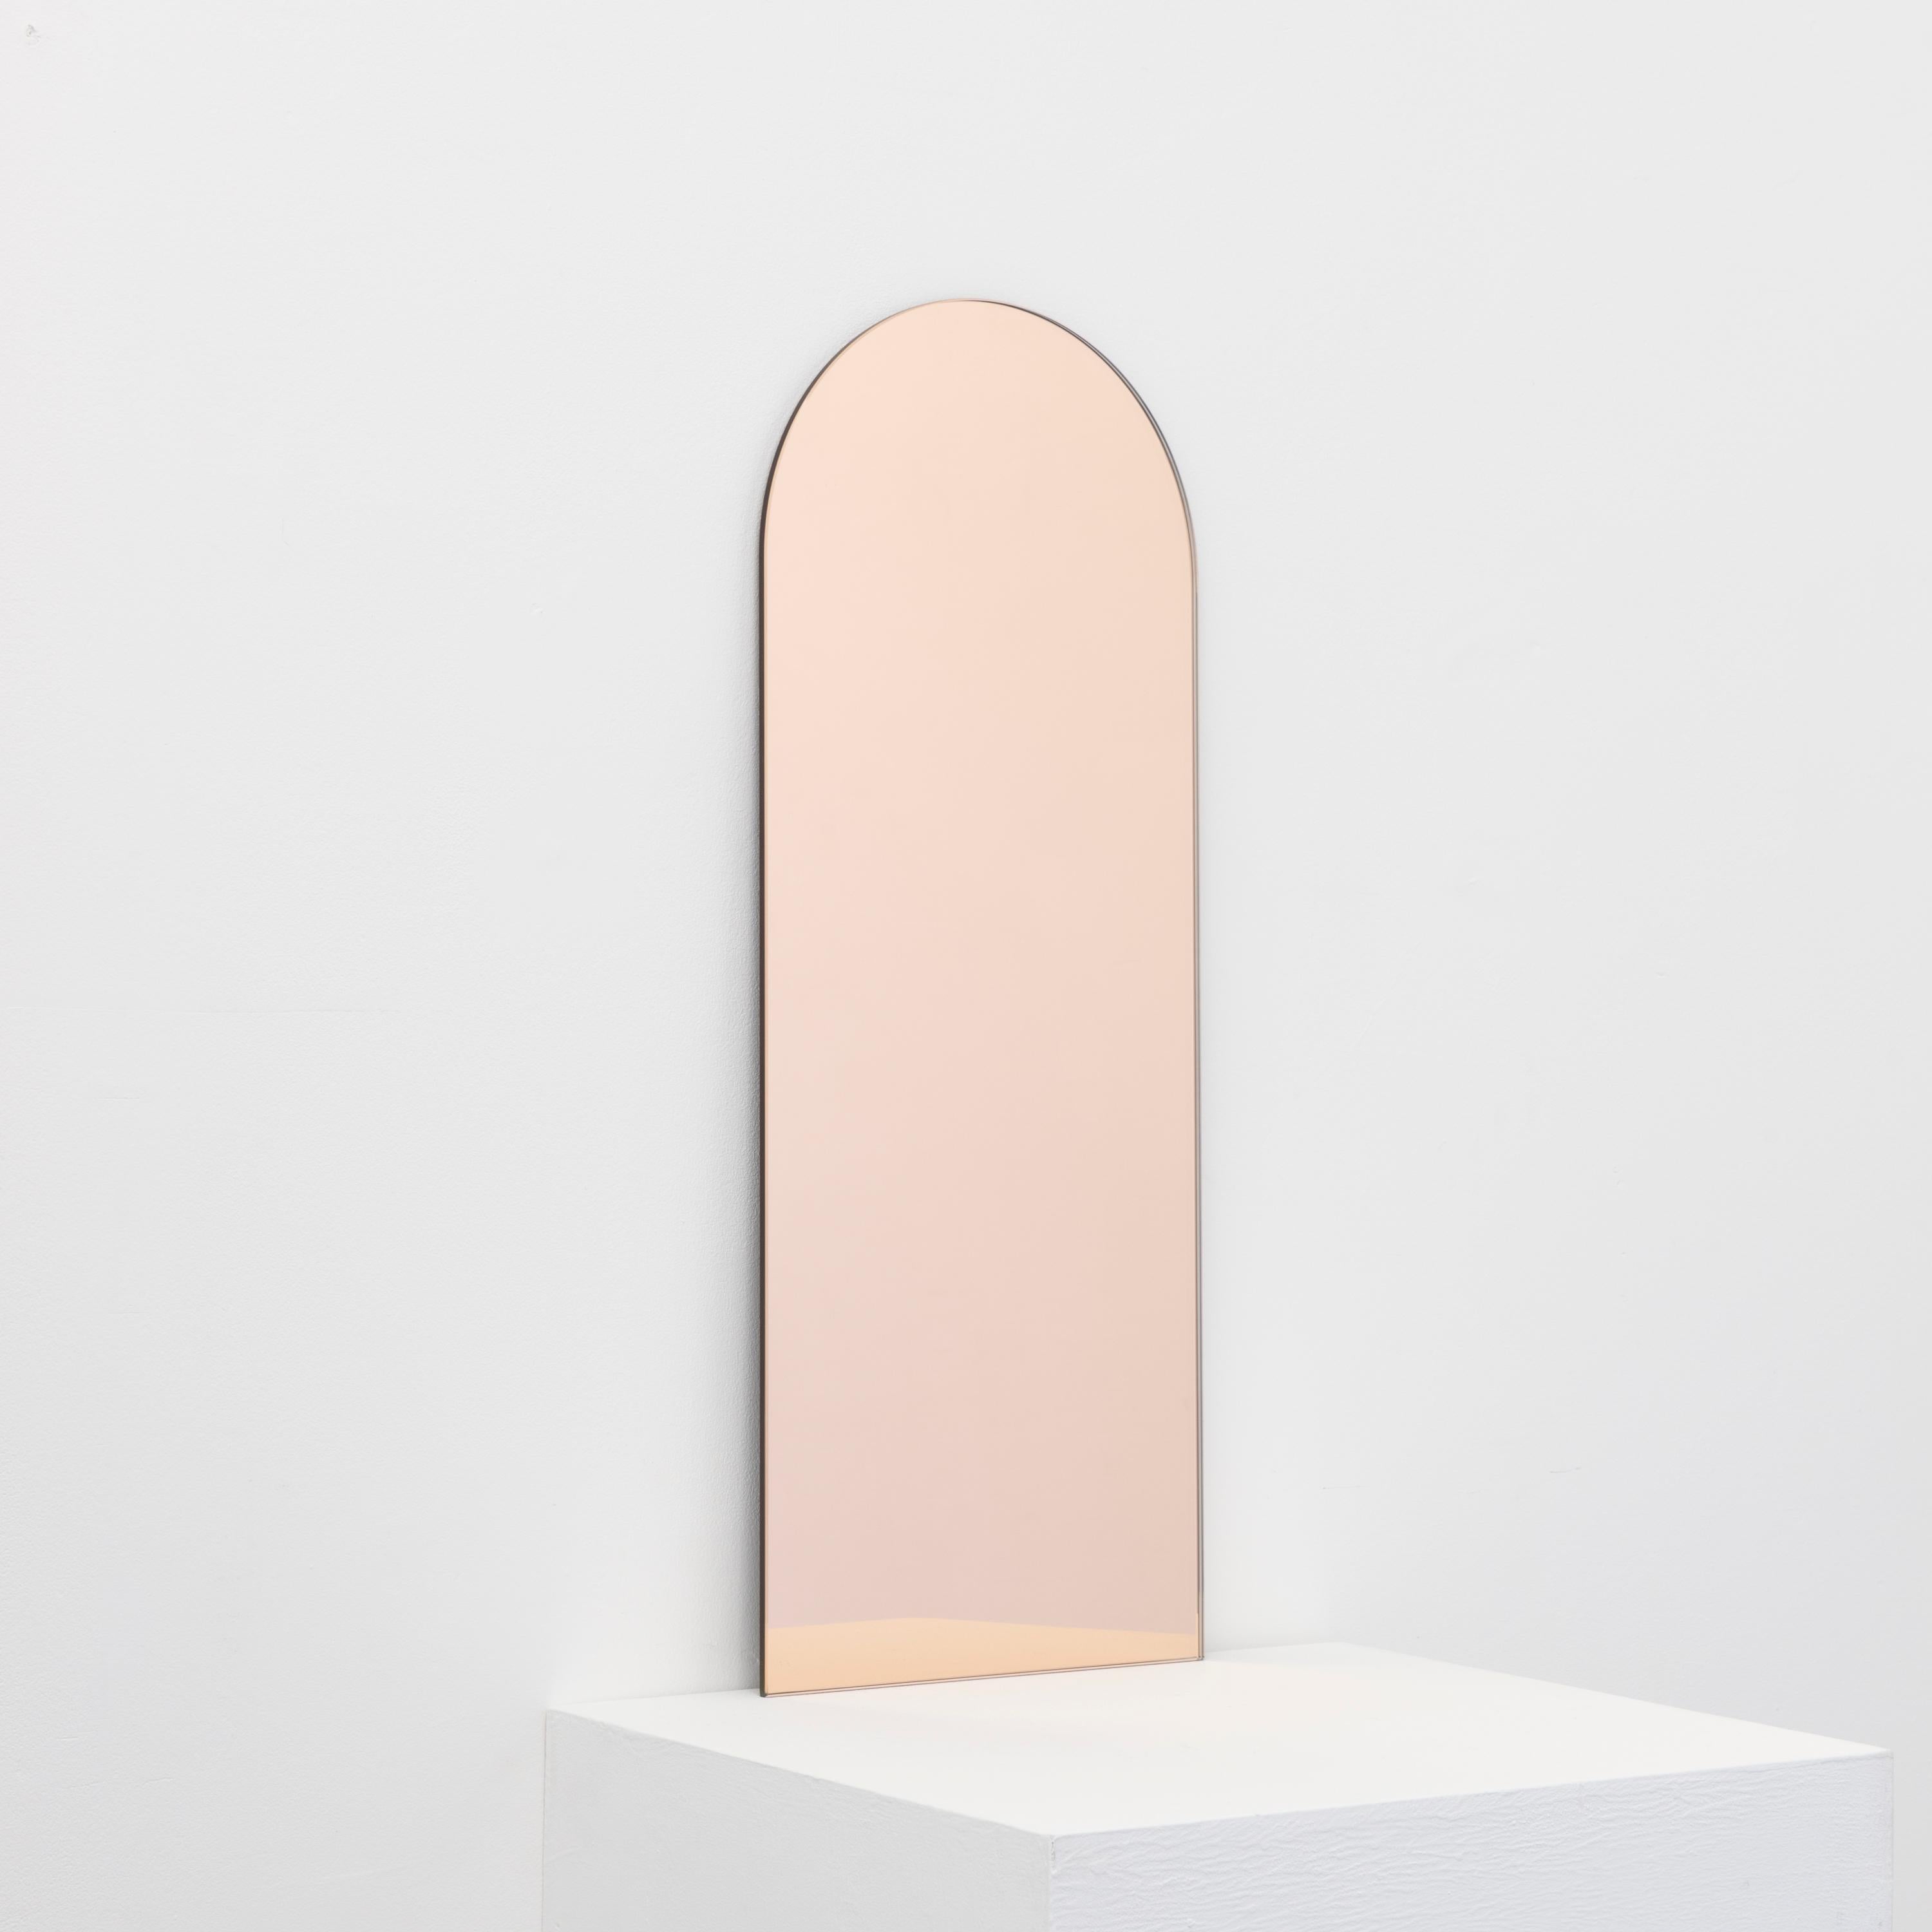 Minimalist arch shaped frameless rose gold tinted mirror with a floating effect. Quality design that ensures the mirror sits perfectly parallel to the wall. Designed and made in London, UK.

Fitted with professional plates not visible once installed